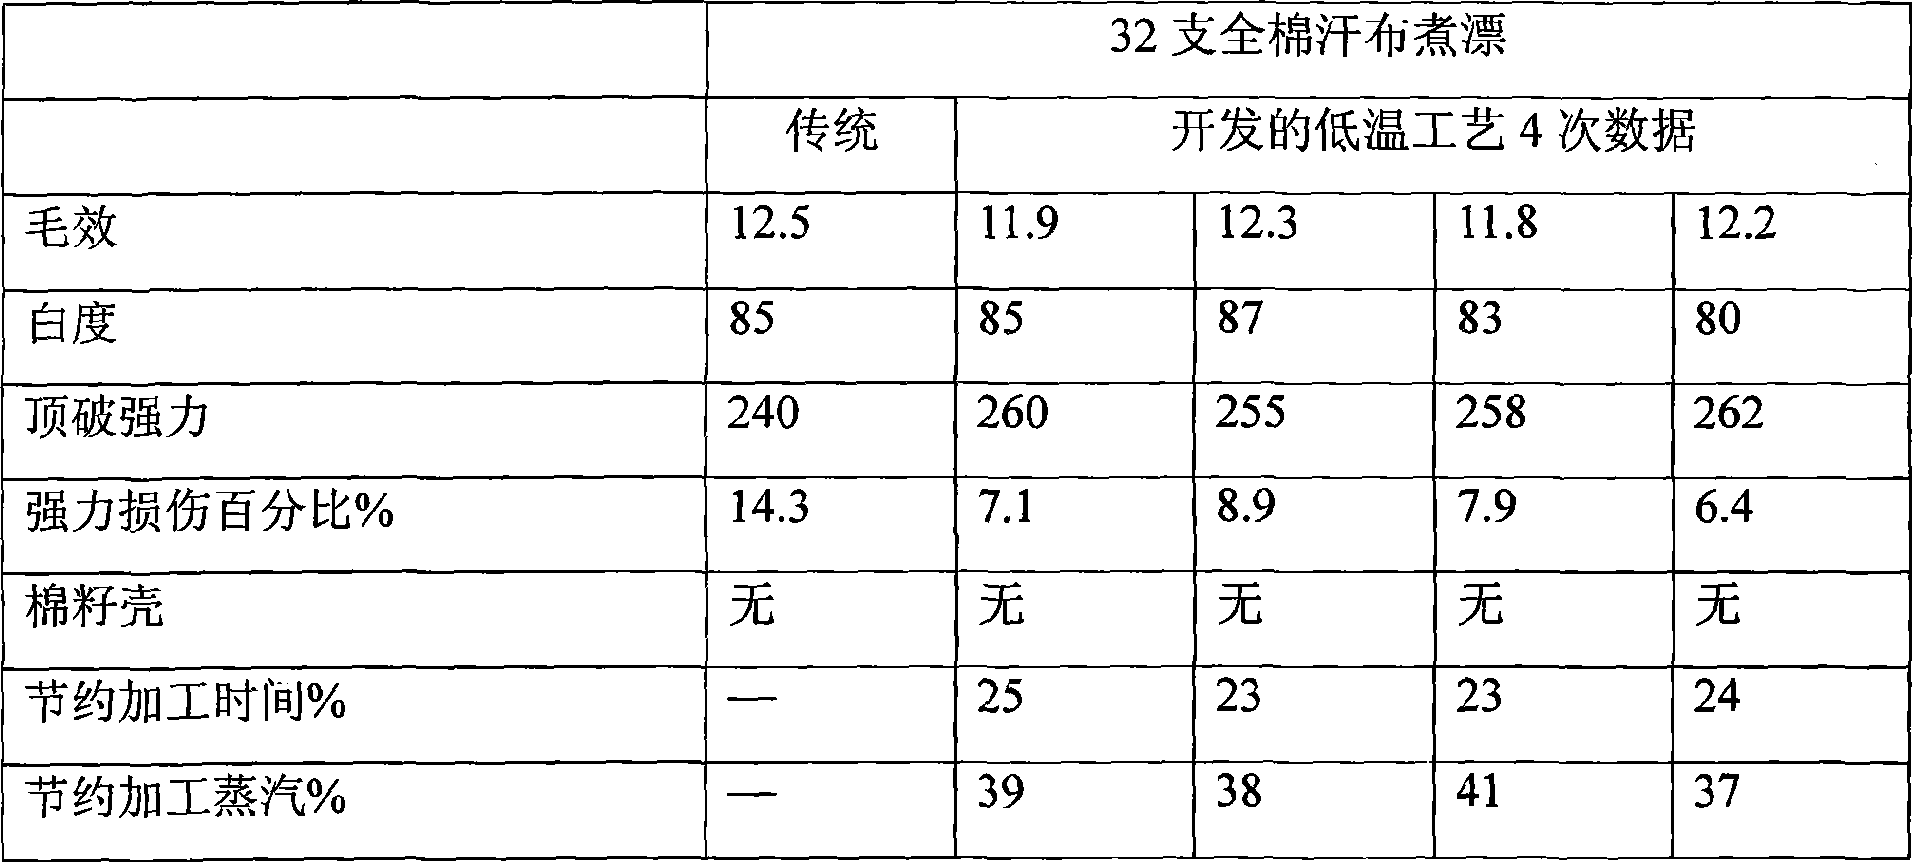 Method for environment-friendly low-temperature scouring and bleaching in spinning dyeing and finishing